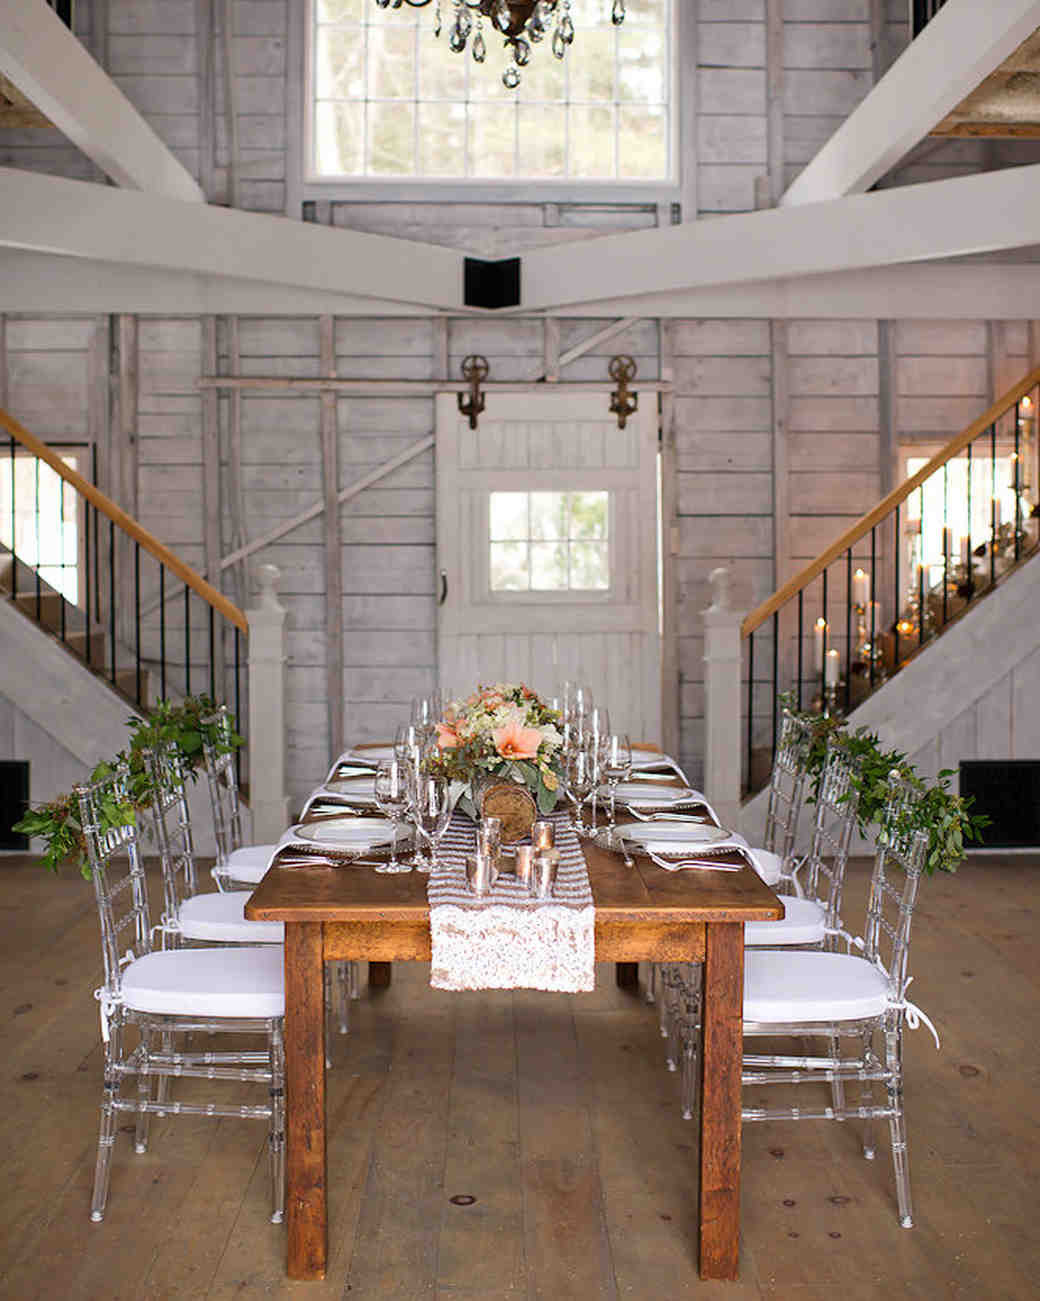 Rustic Wedding Venues
 11 Rustic Wedding Venues to Book for Your Big Day